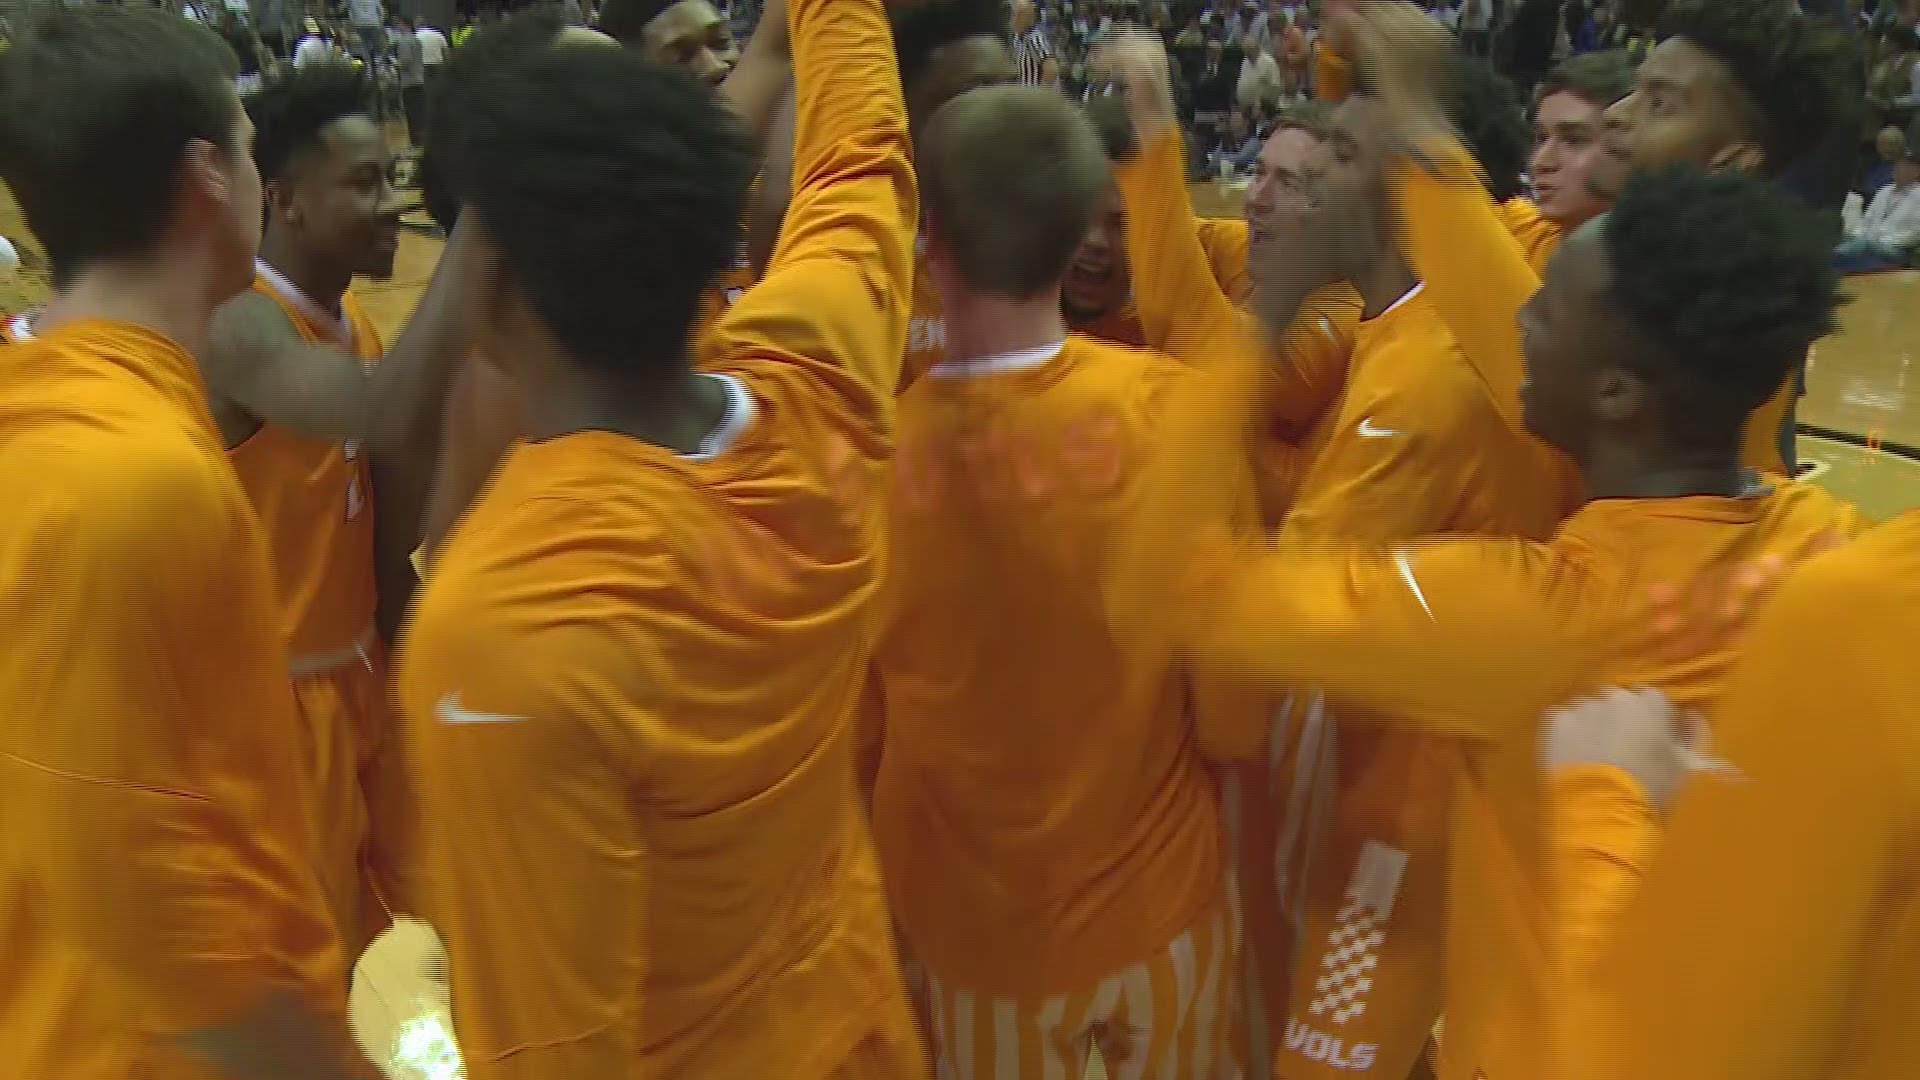 WBIR 10Sports Anchor Patrick Murray reports from Nashville where Tennessee took down rival Vanderbilt 87-75 on Saturday night.